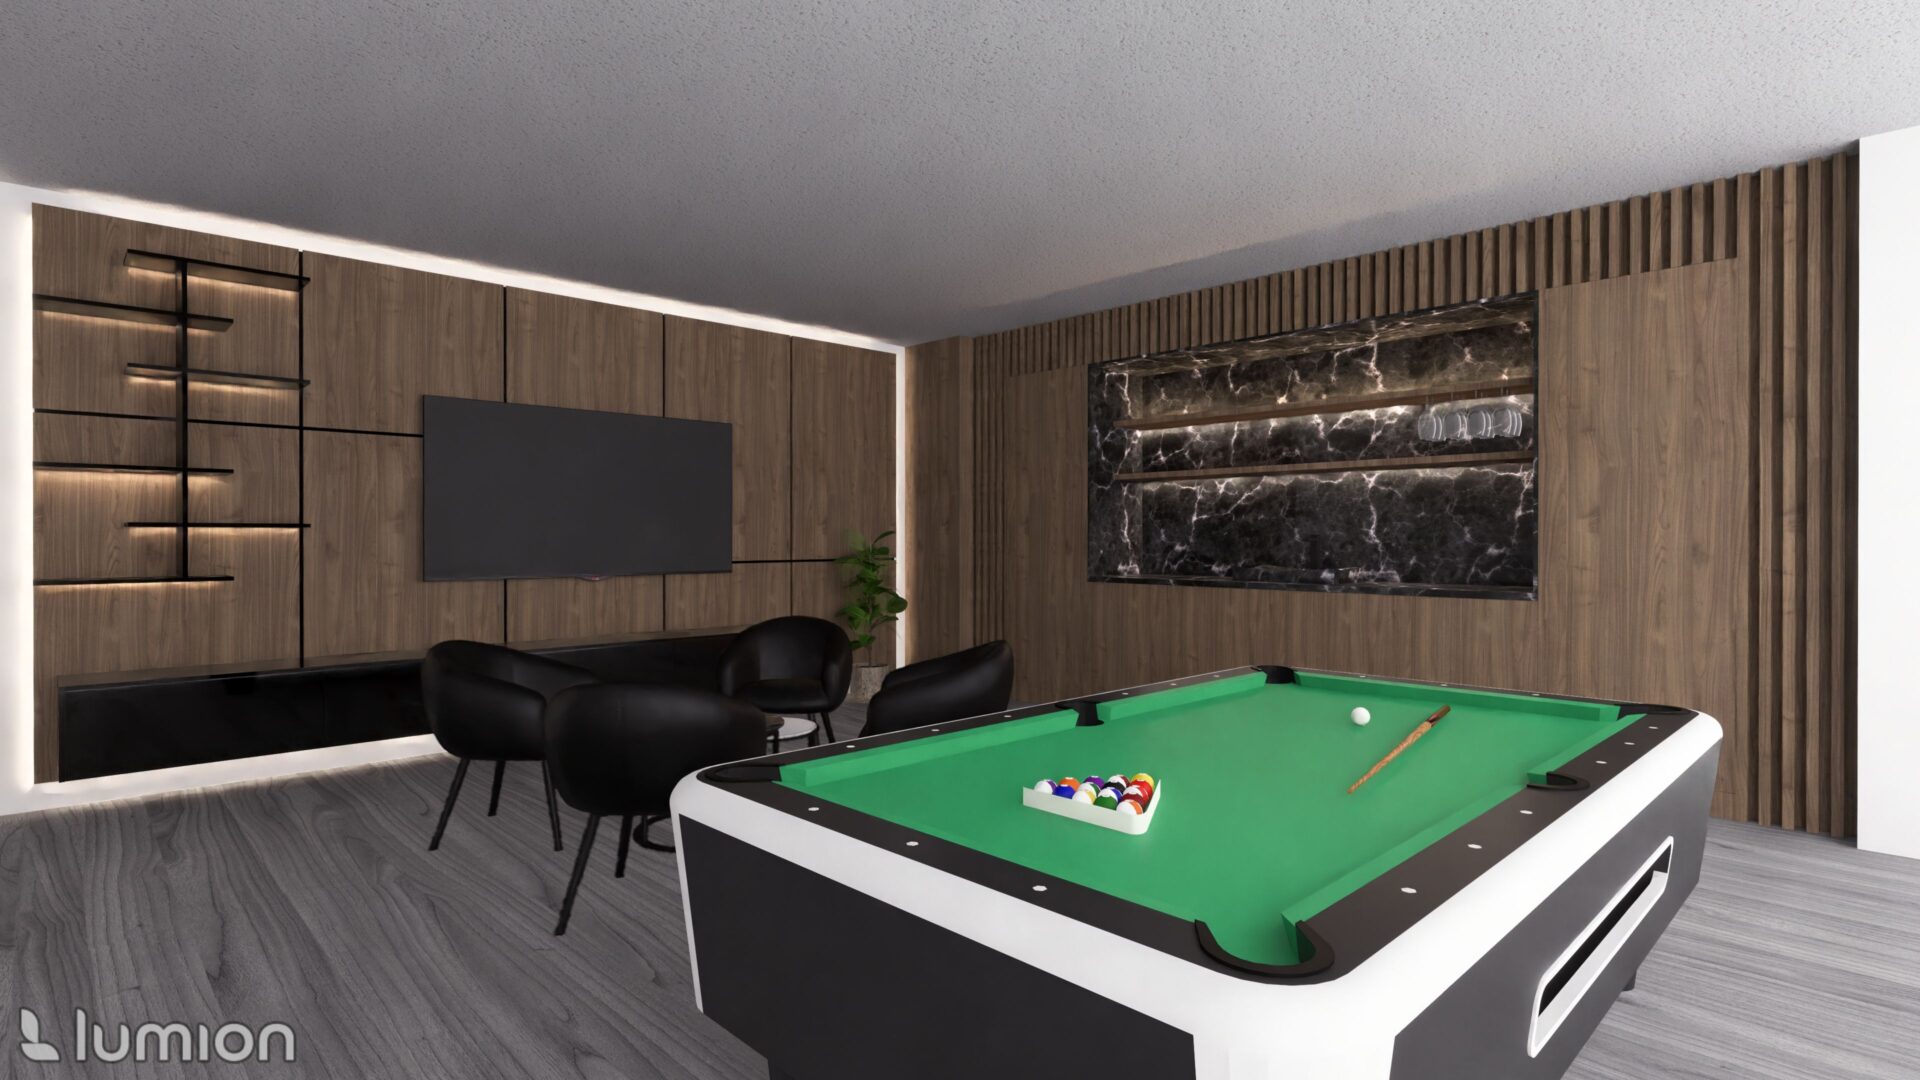 A pool table in the middle of a room with chairs.